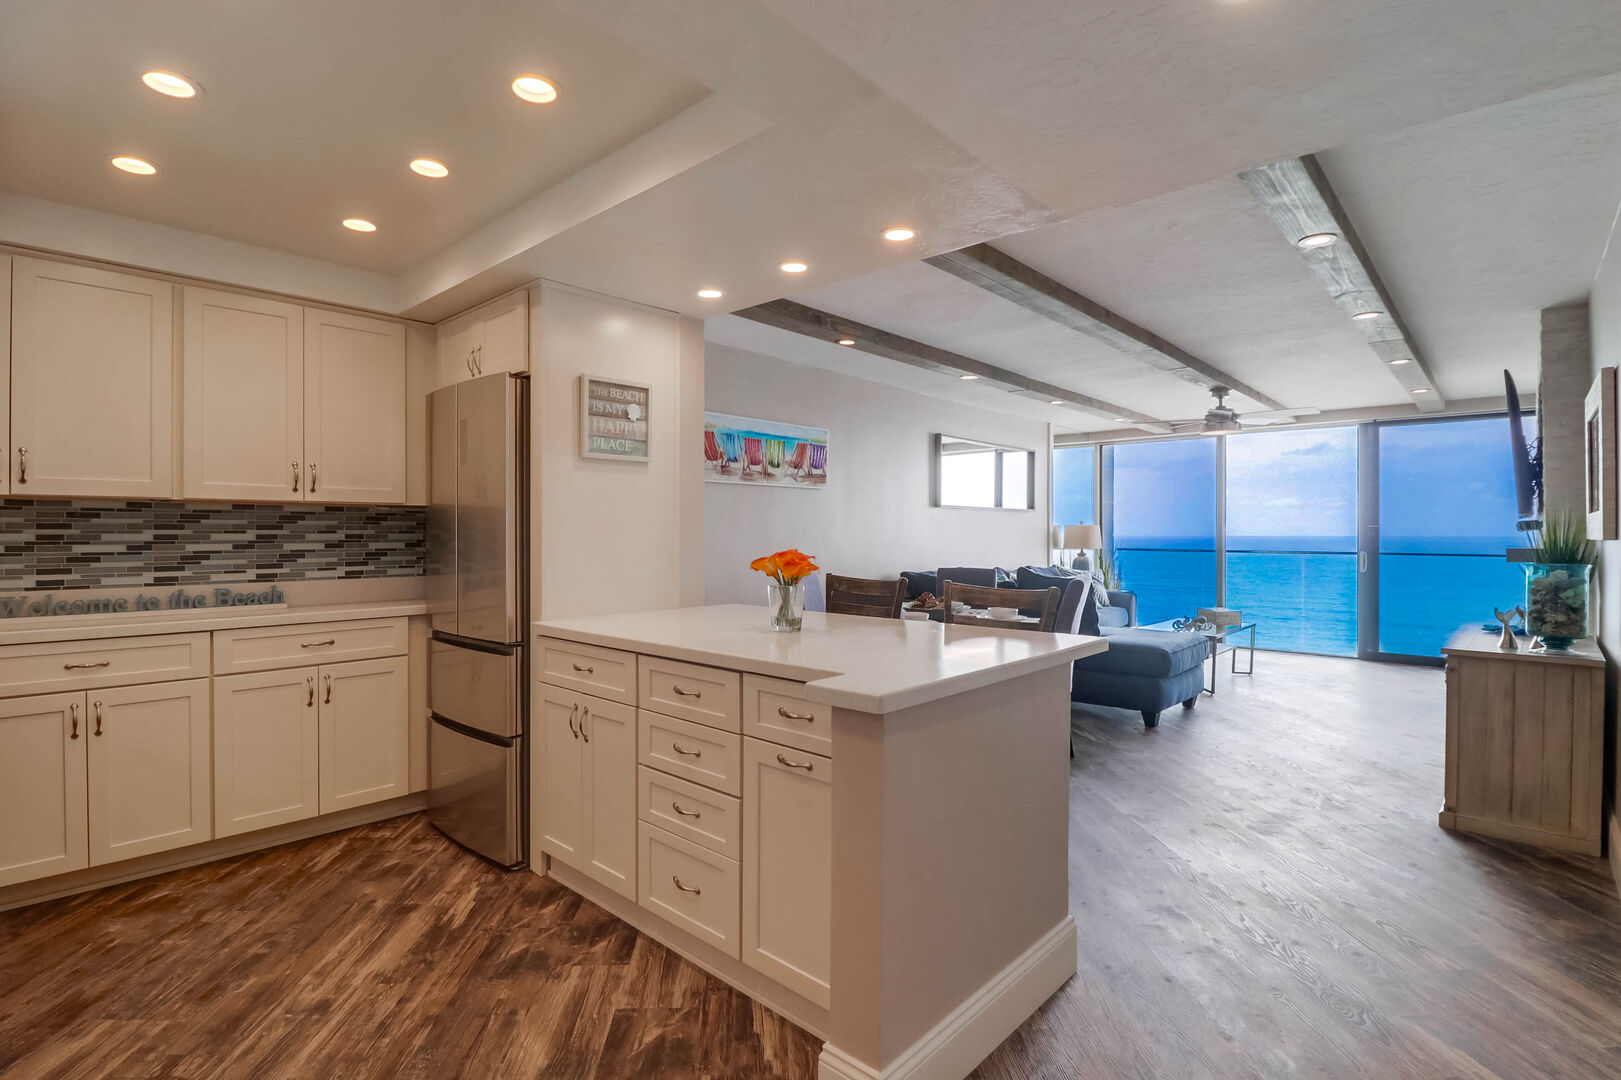 Kitchen with stainless steel appliances, quartz countertops, recessed lighting, and a view